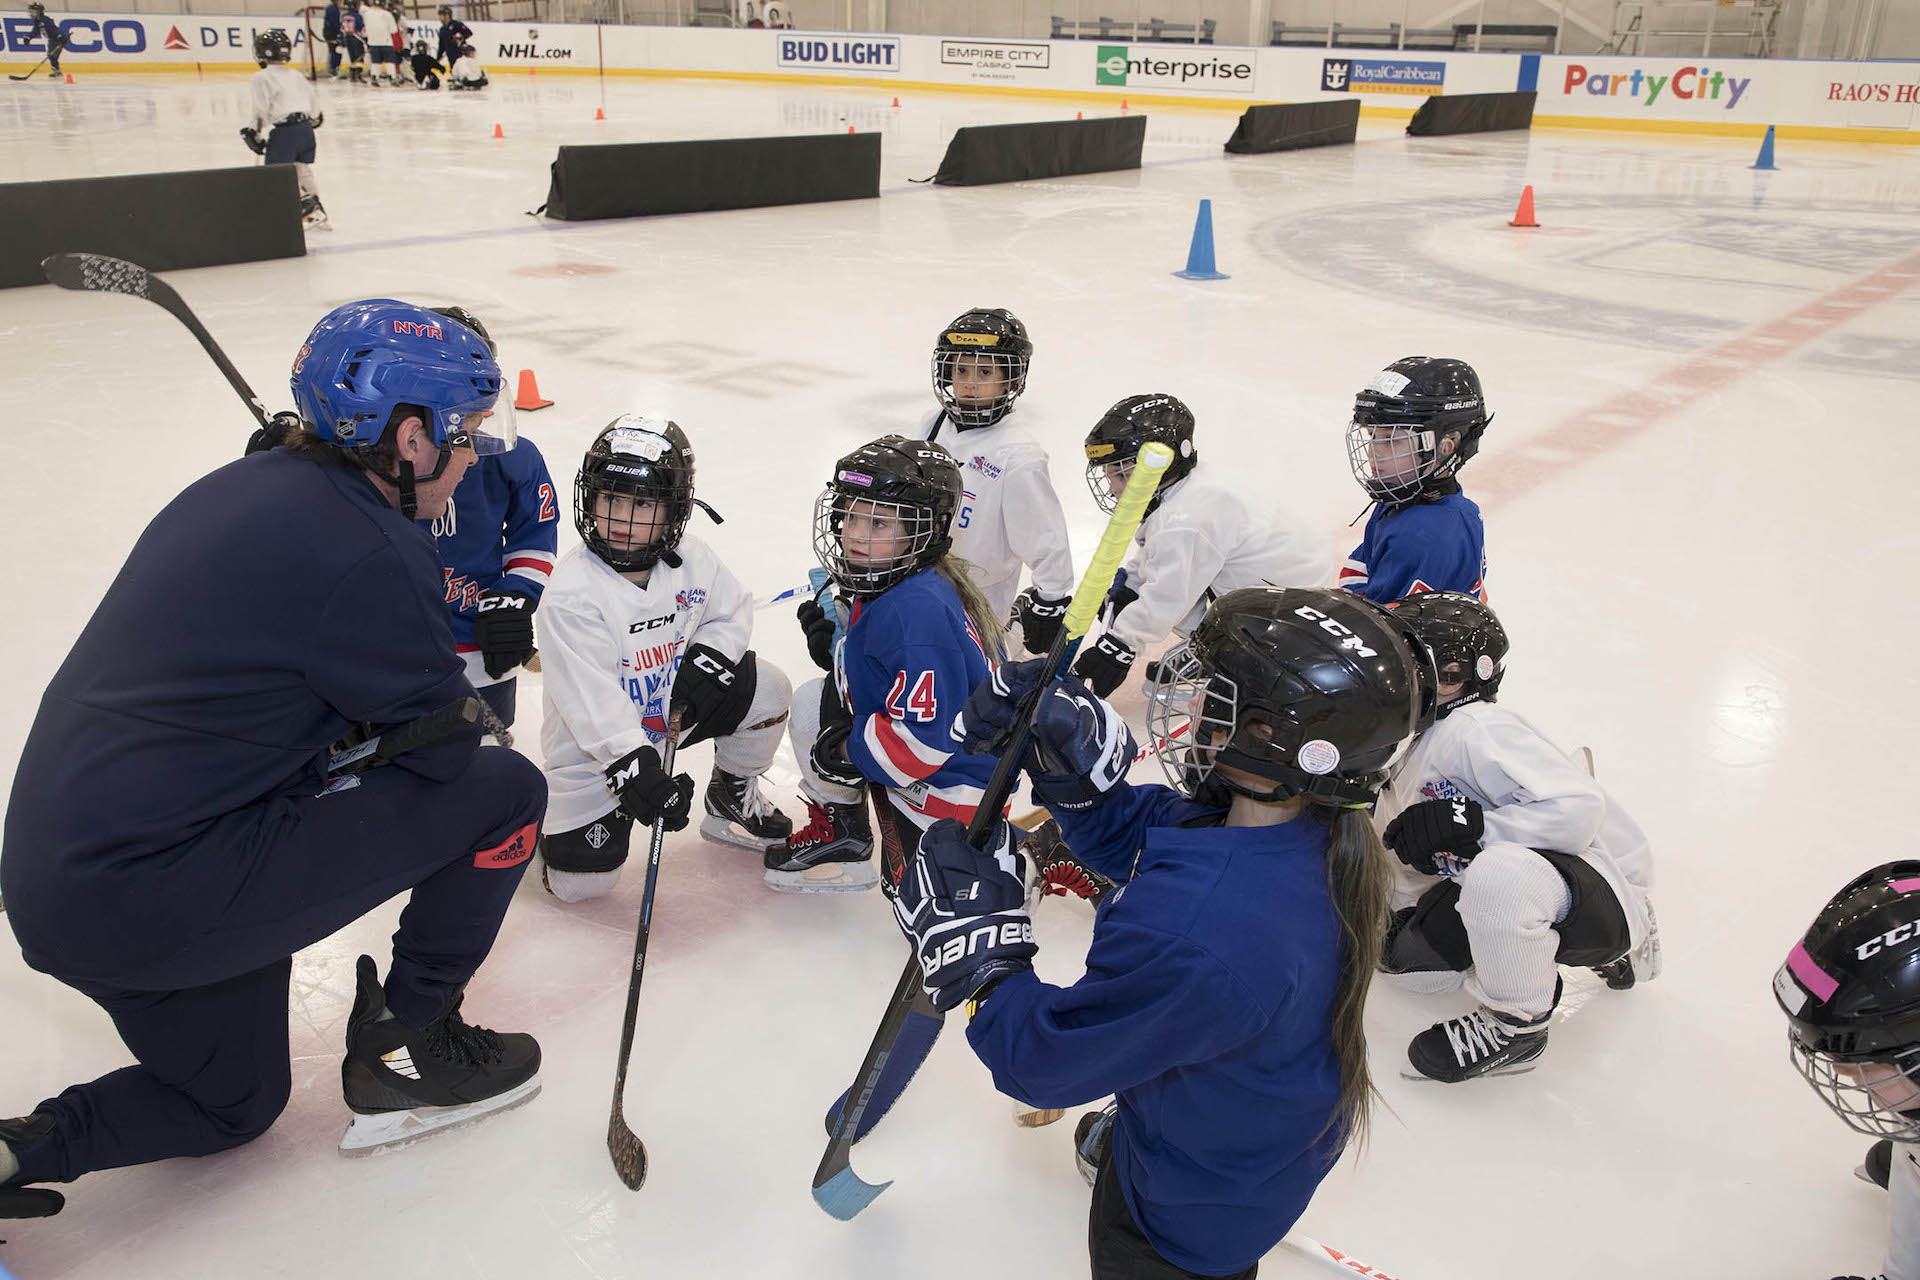 New York Rangers Youth Hockey Camp coming to Long Beach Arena - Newsday